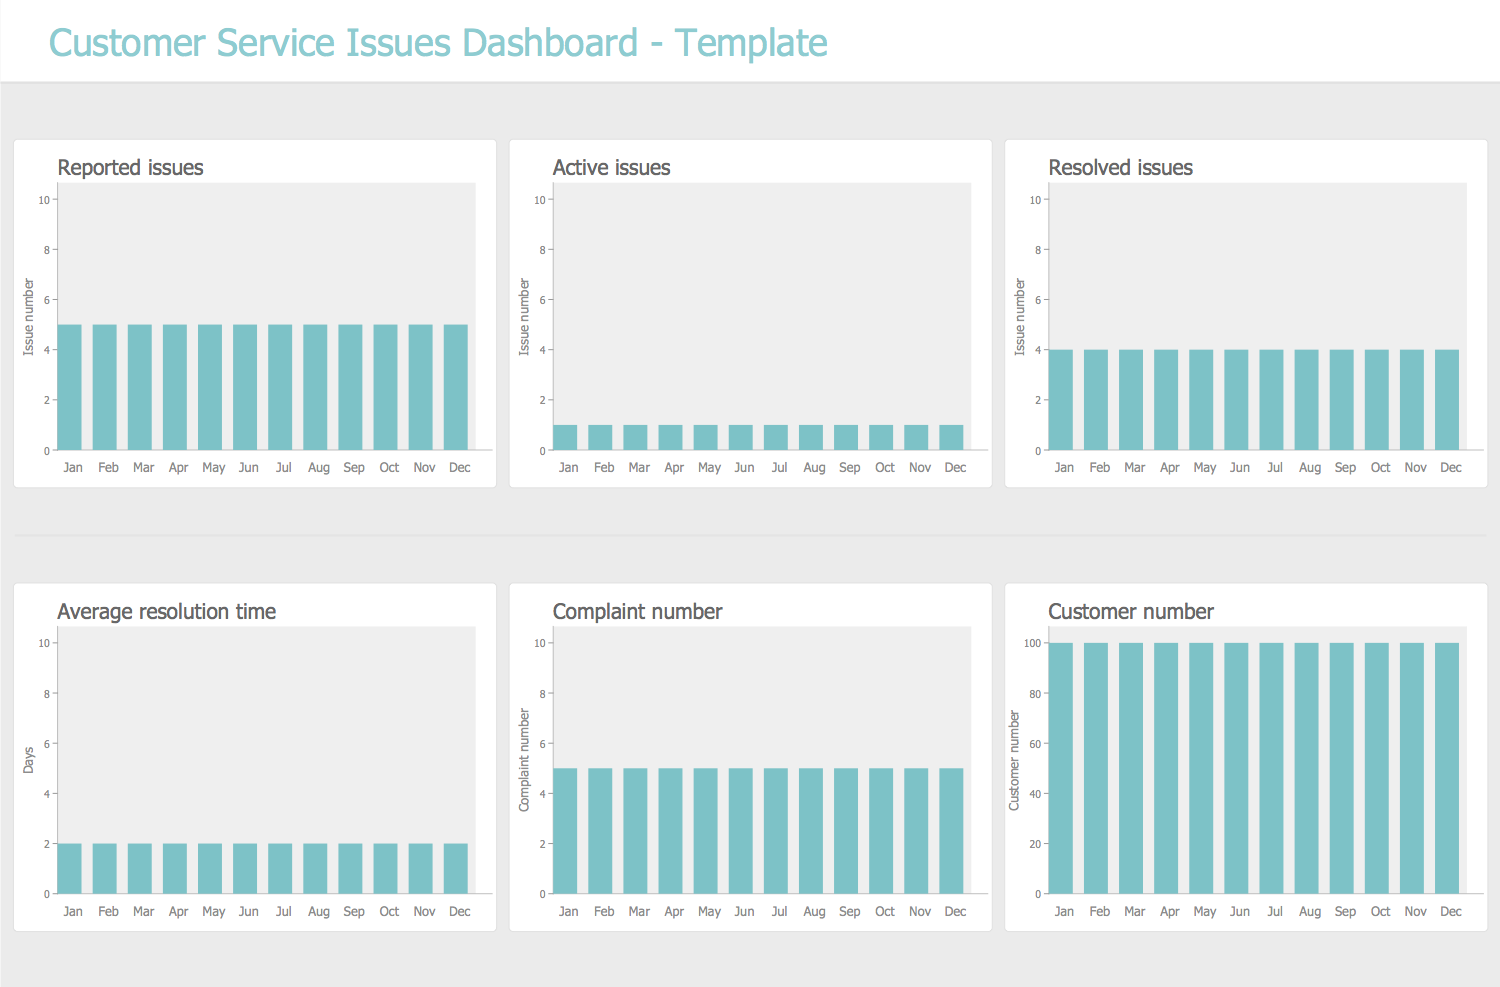 Customer Service Issues Dashboard Template